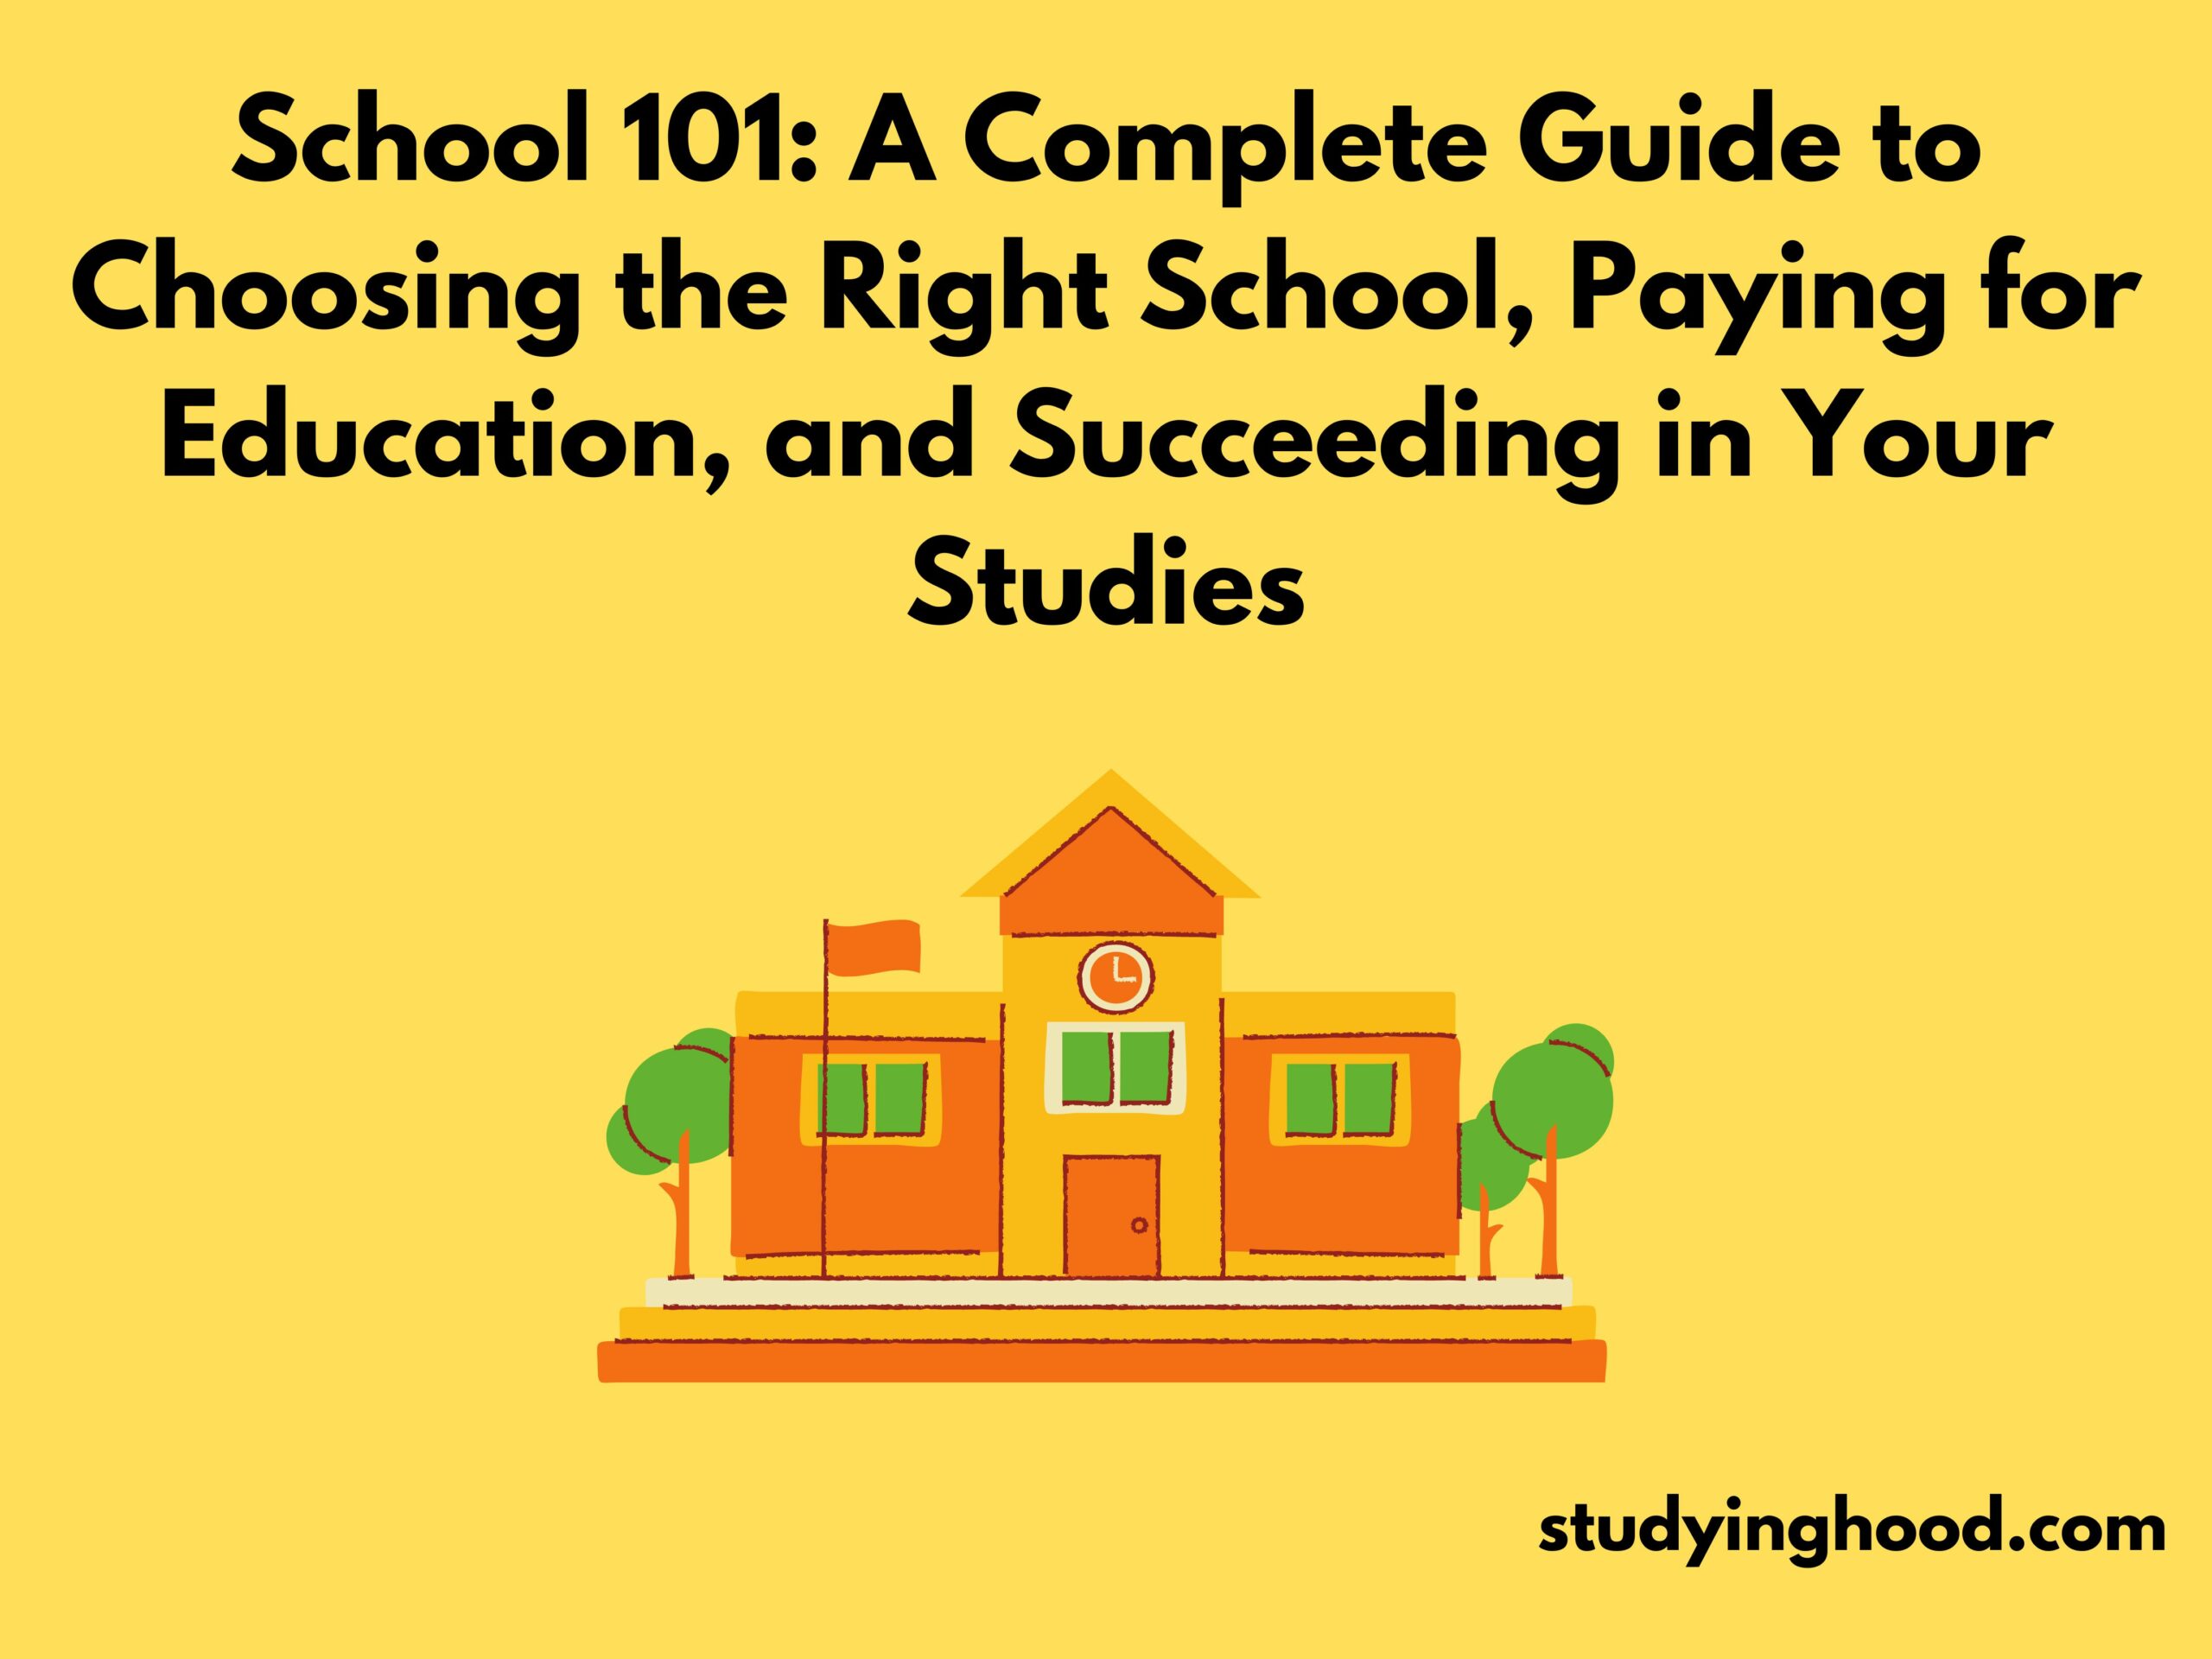 School 101: A Complete Guide to Choosing the Right School, Paying for Education, and Succeeding in Your Studies